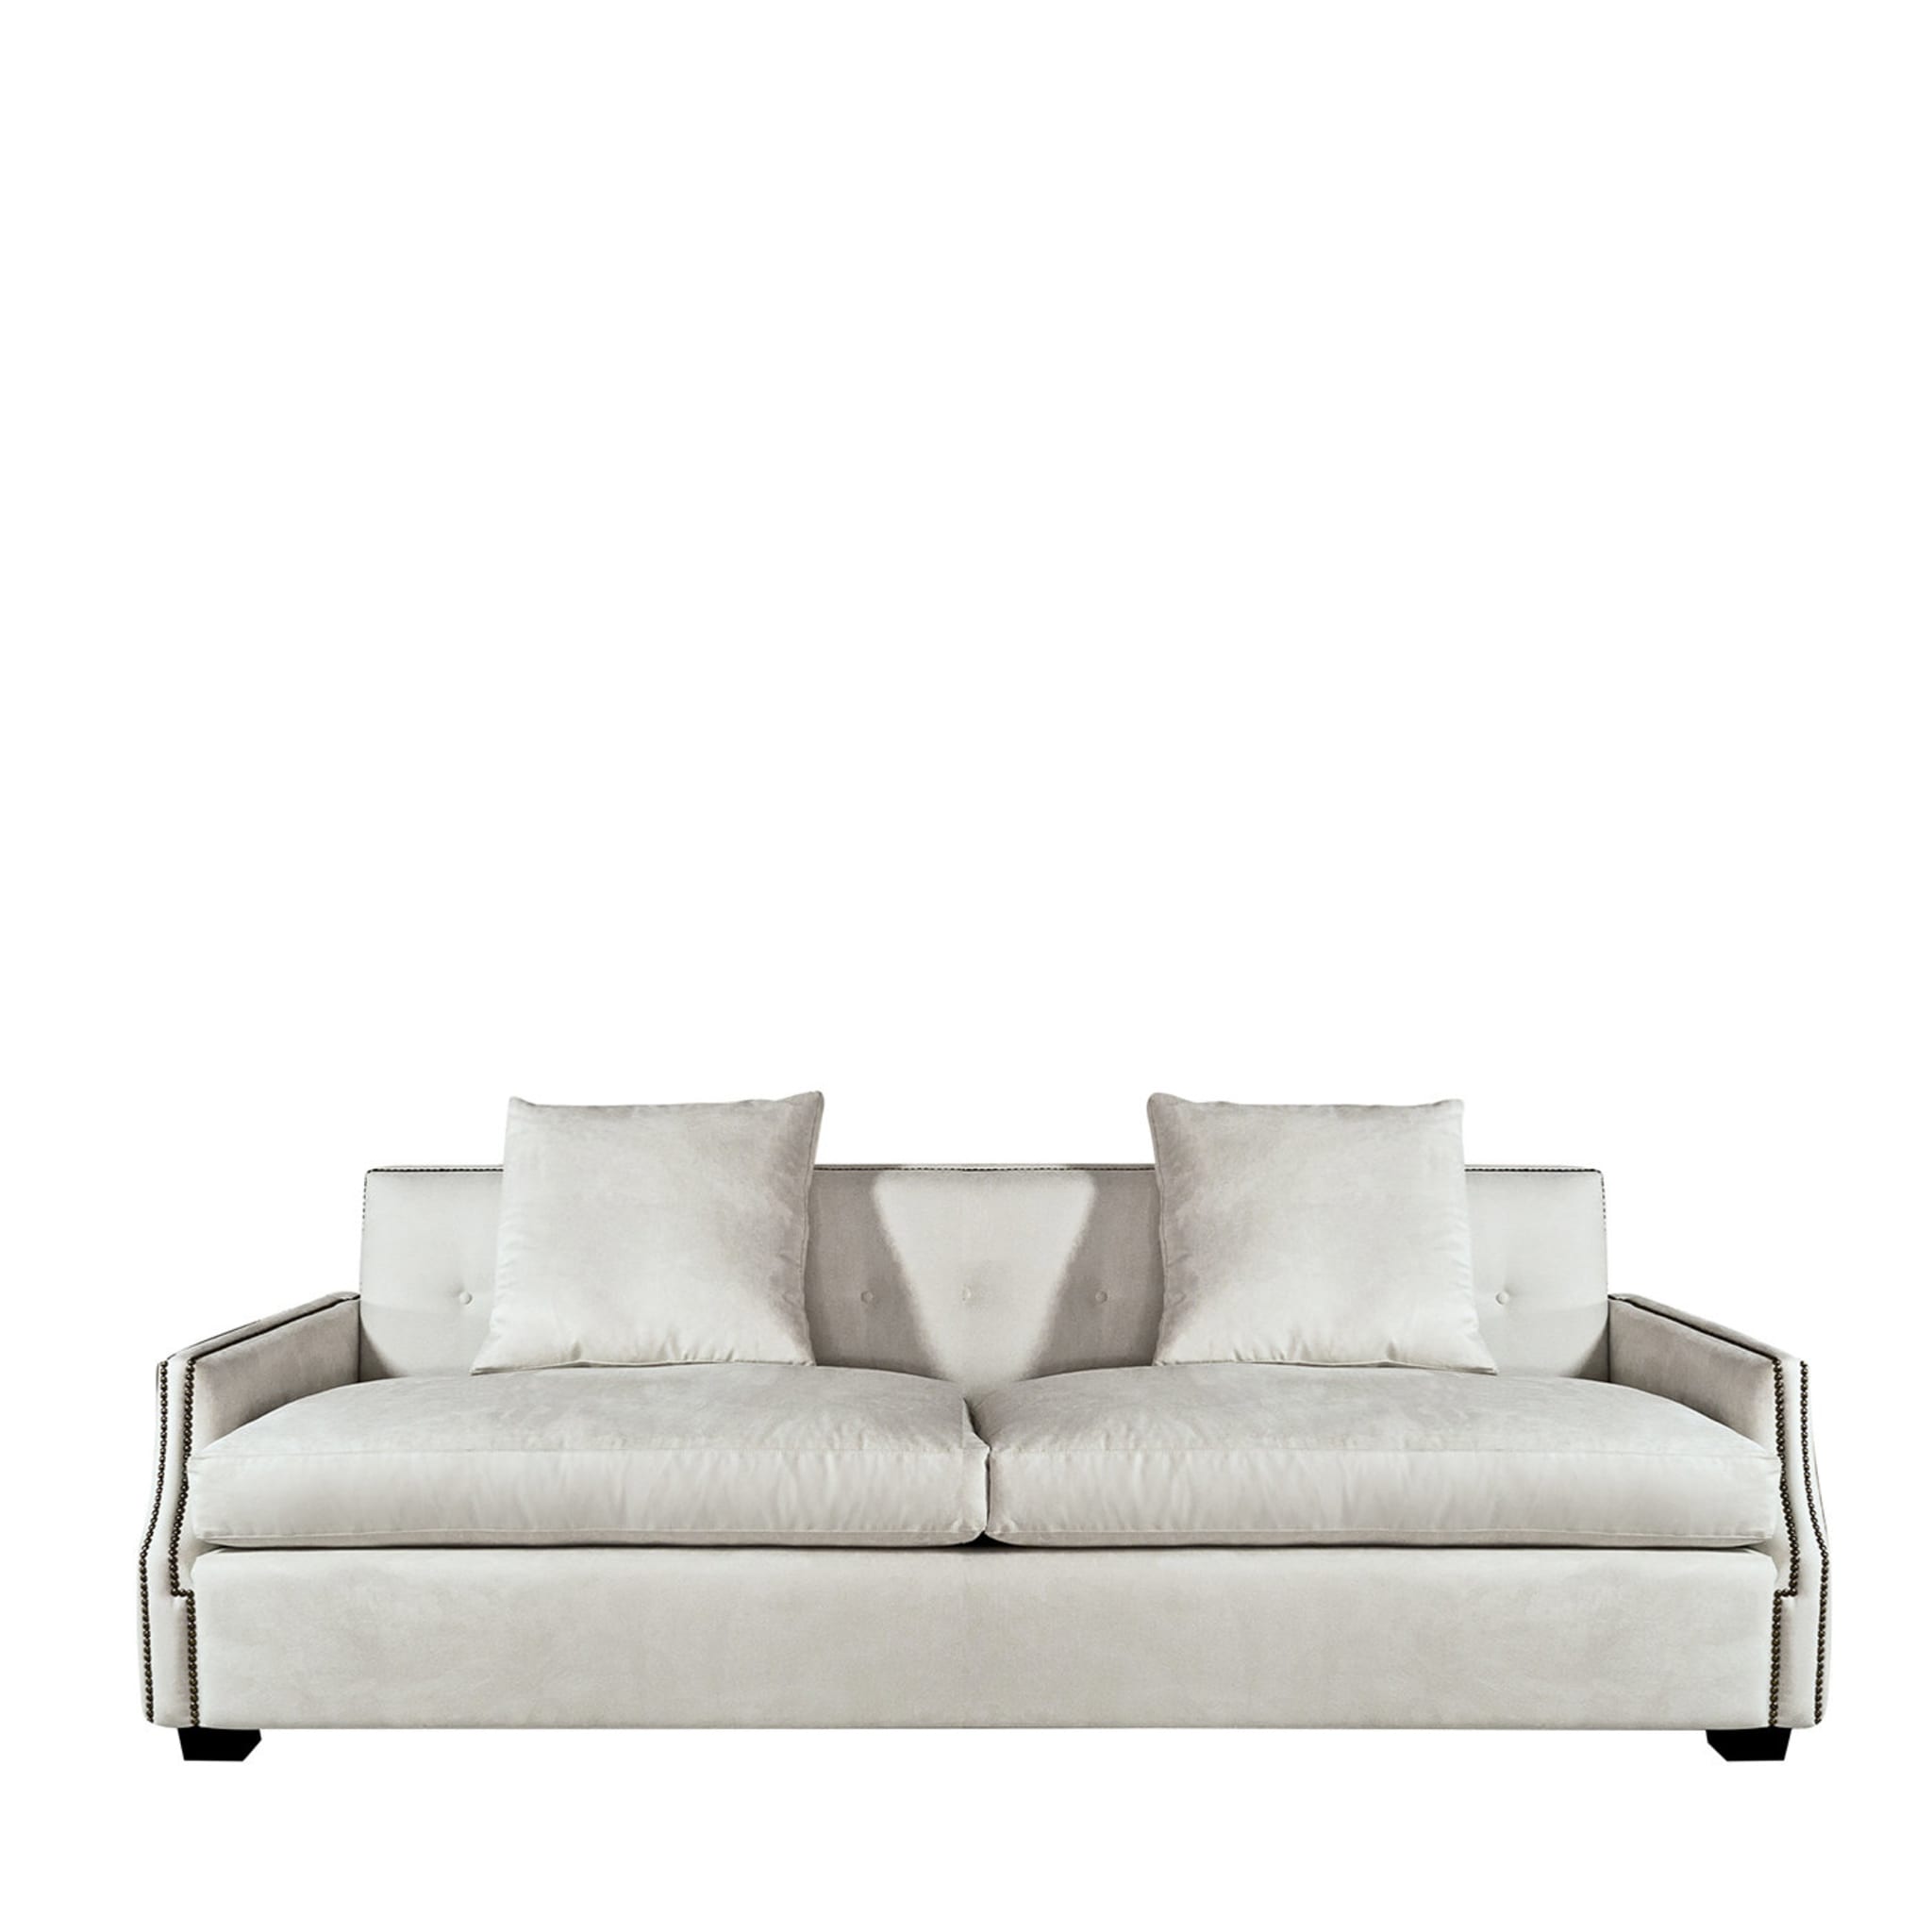 Studded Off-White Sofa - Main view